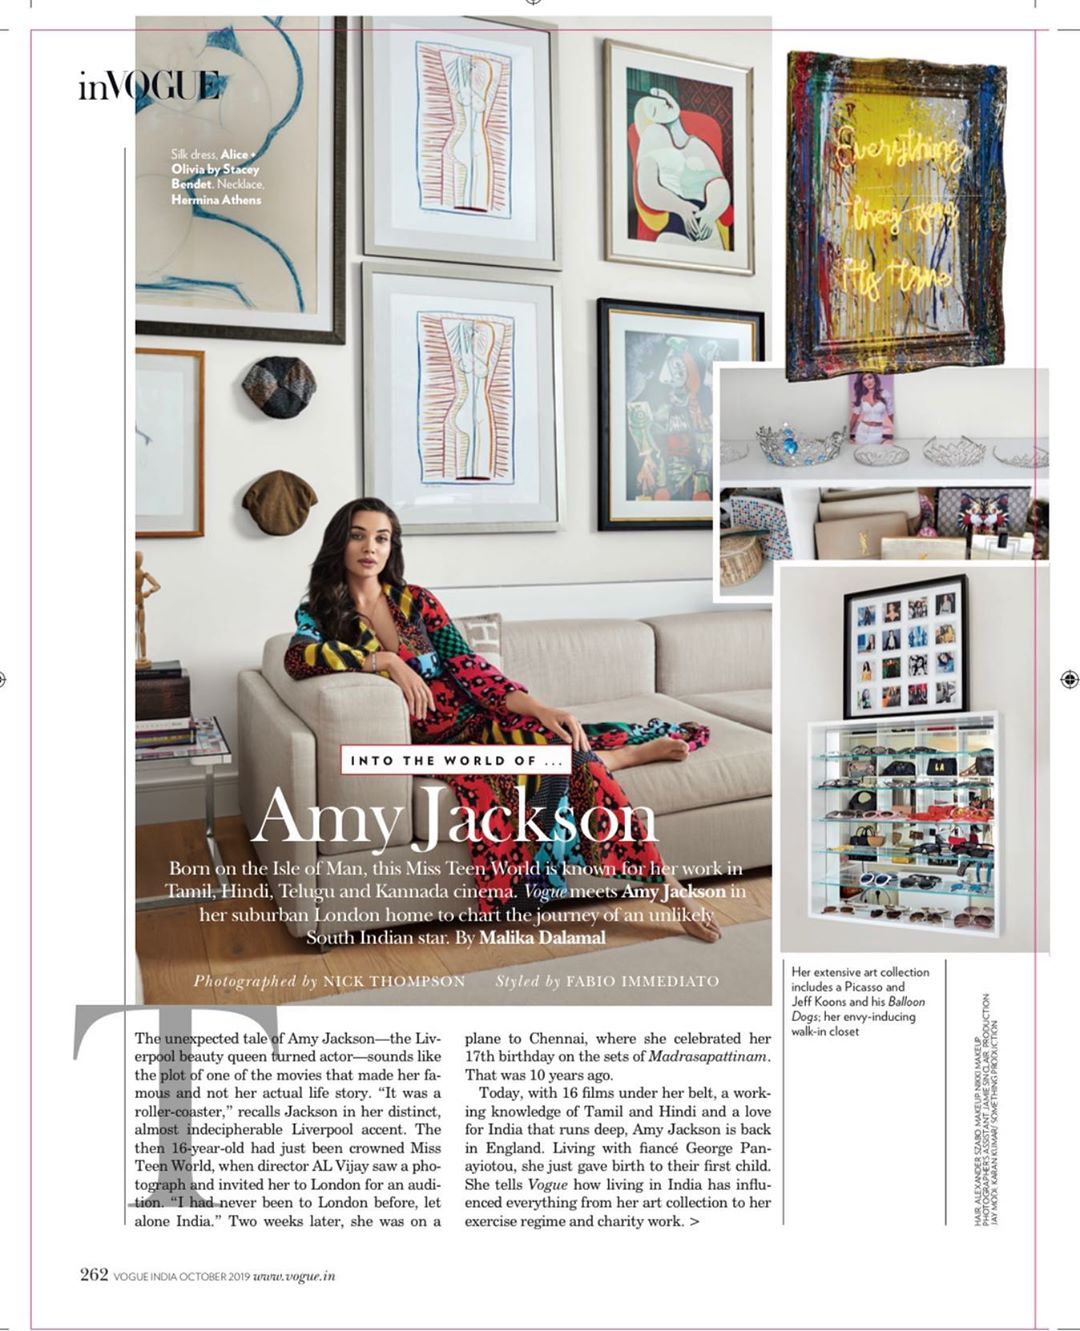 Amy Jackson Had a lovely little visit from  a couple of months back. The Wallpaper